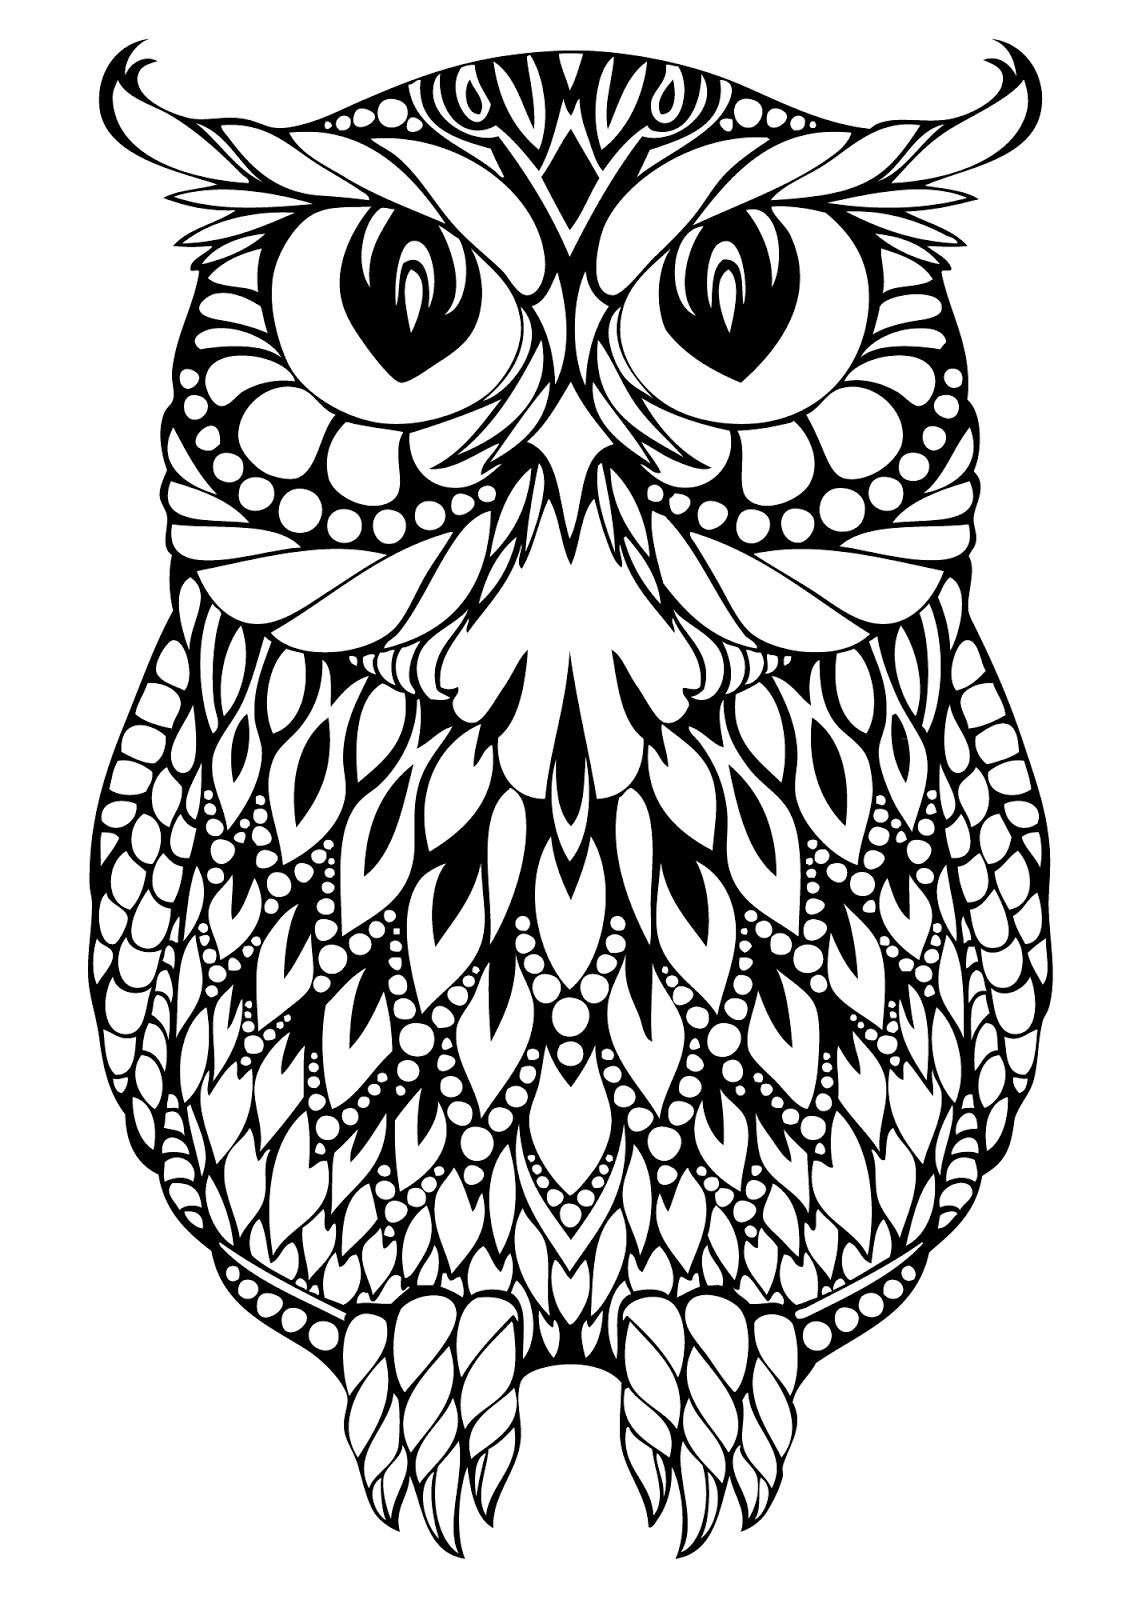 Printable Coloring Pages For Adults
 Serendipity Adult Coloring Pages Printable